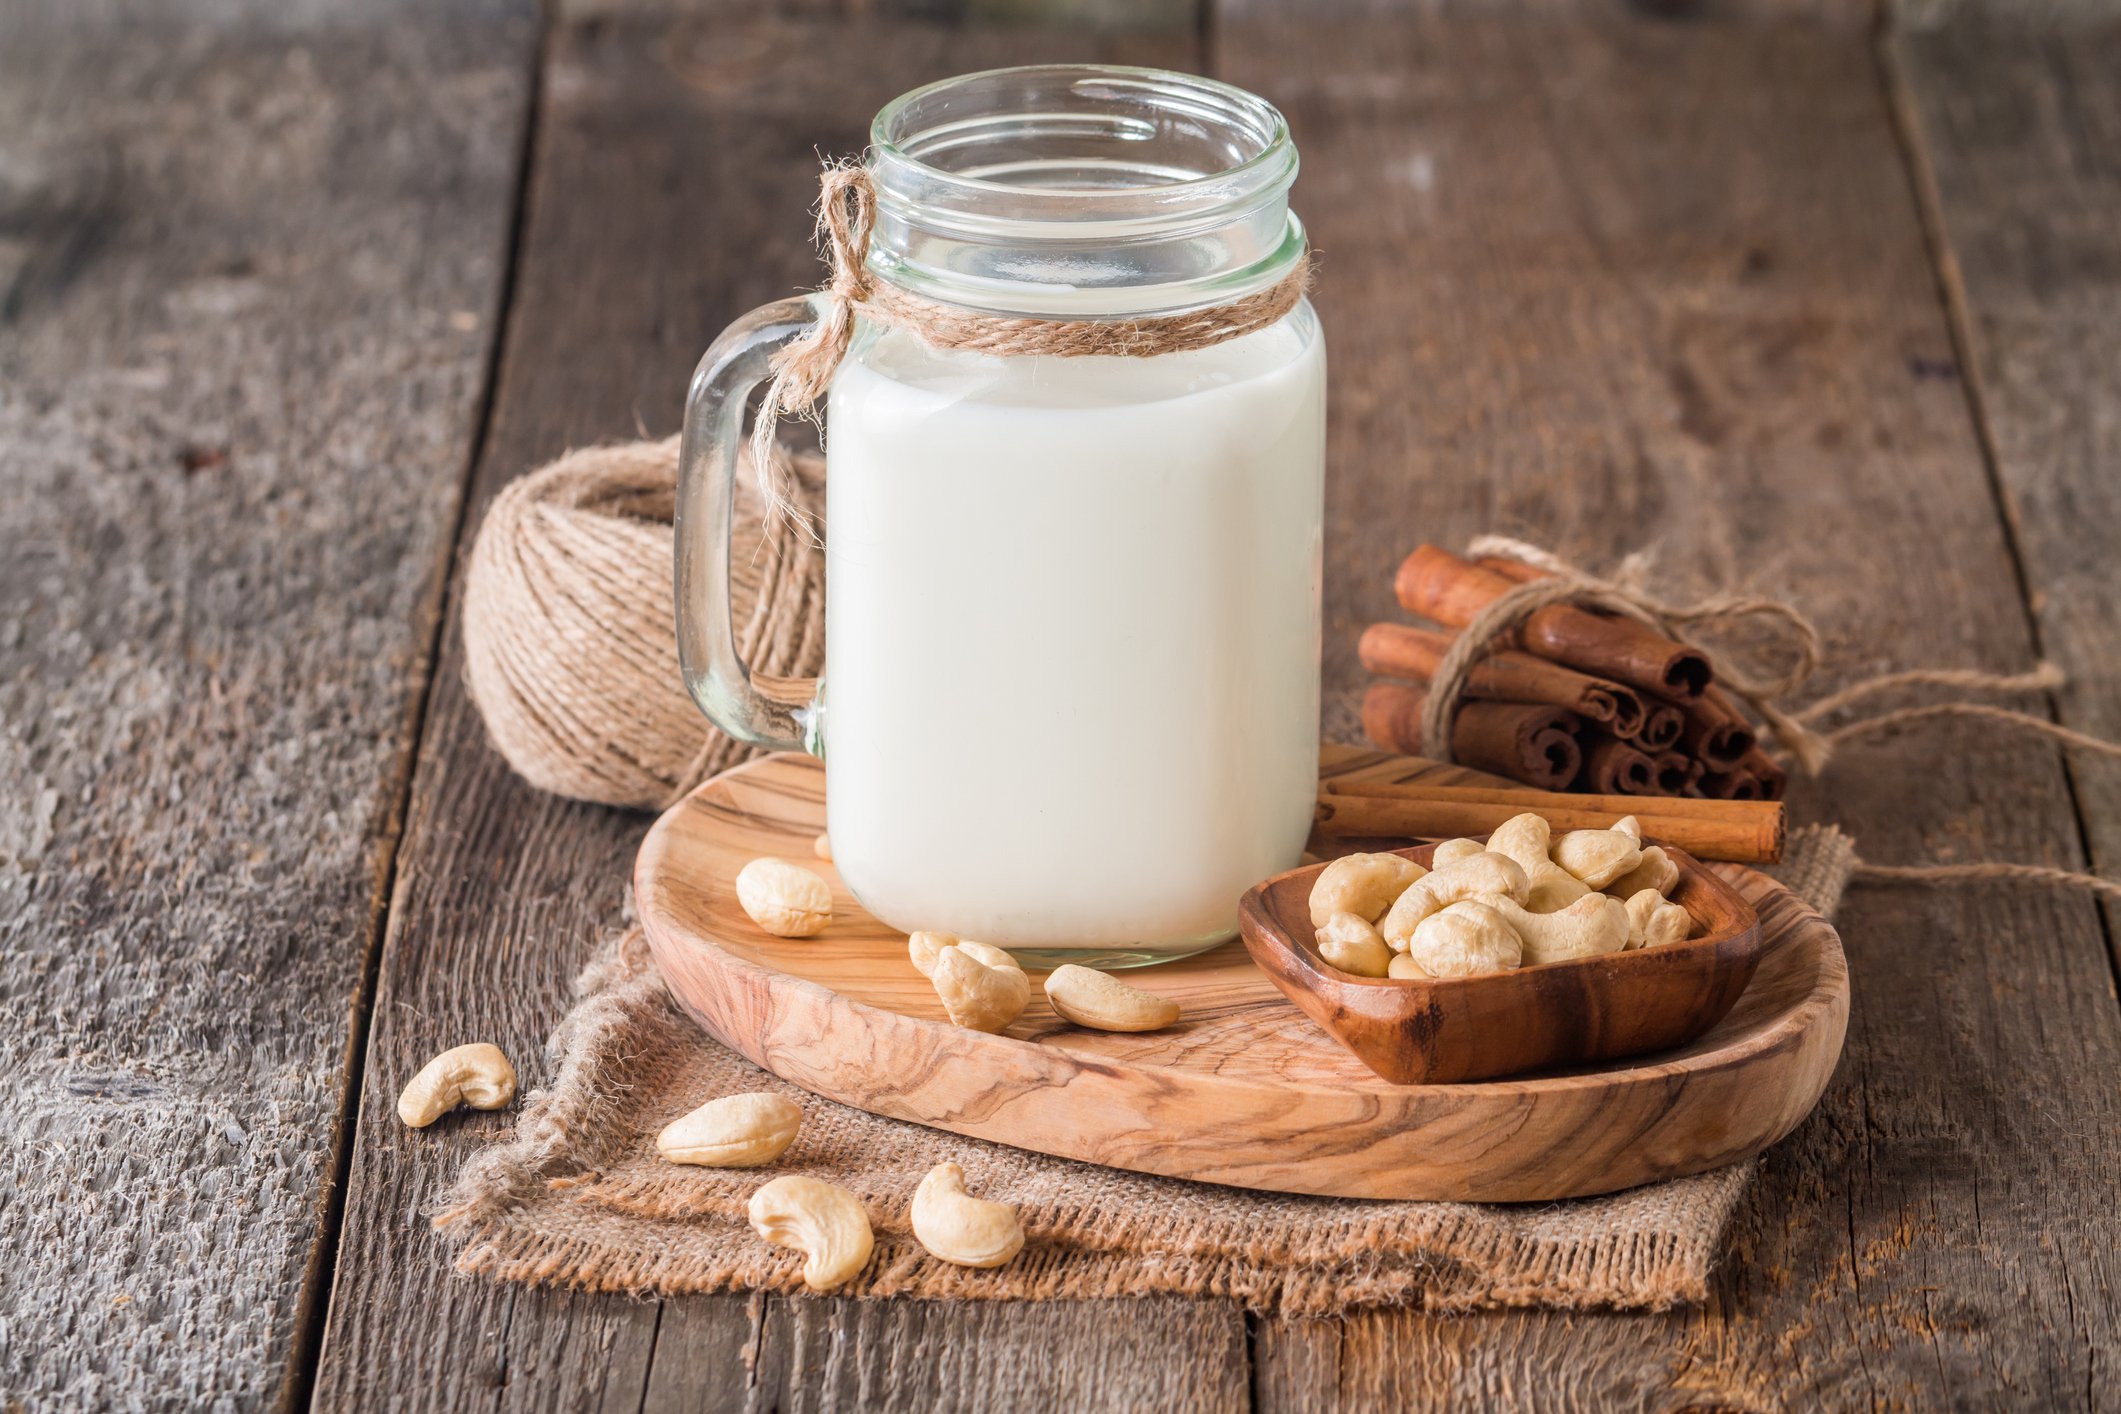 Cashew milk is best used in vegan recipes to create 'cheeses' and creamier textures. (iStock Photo)